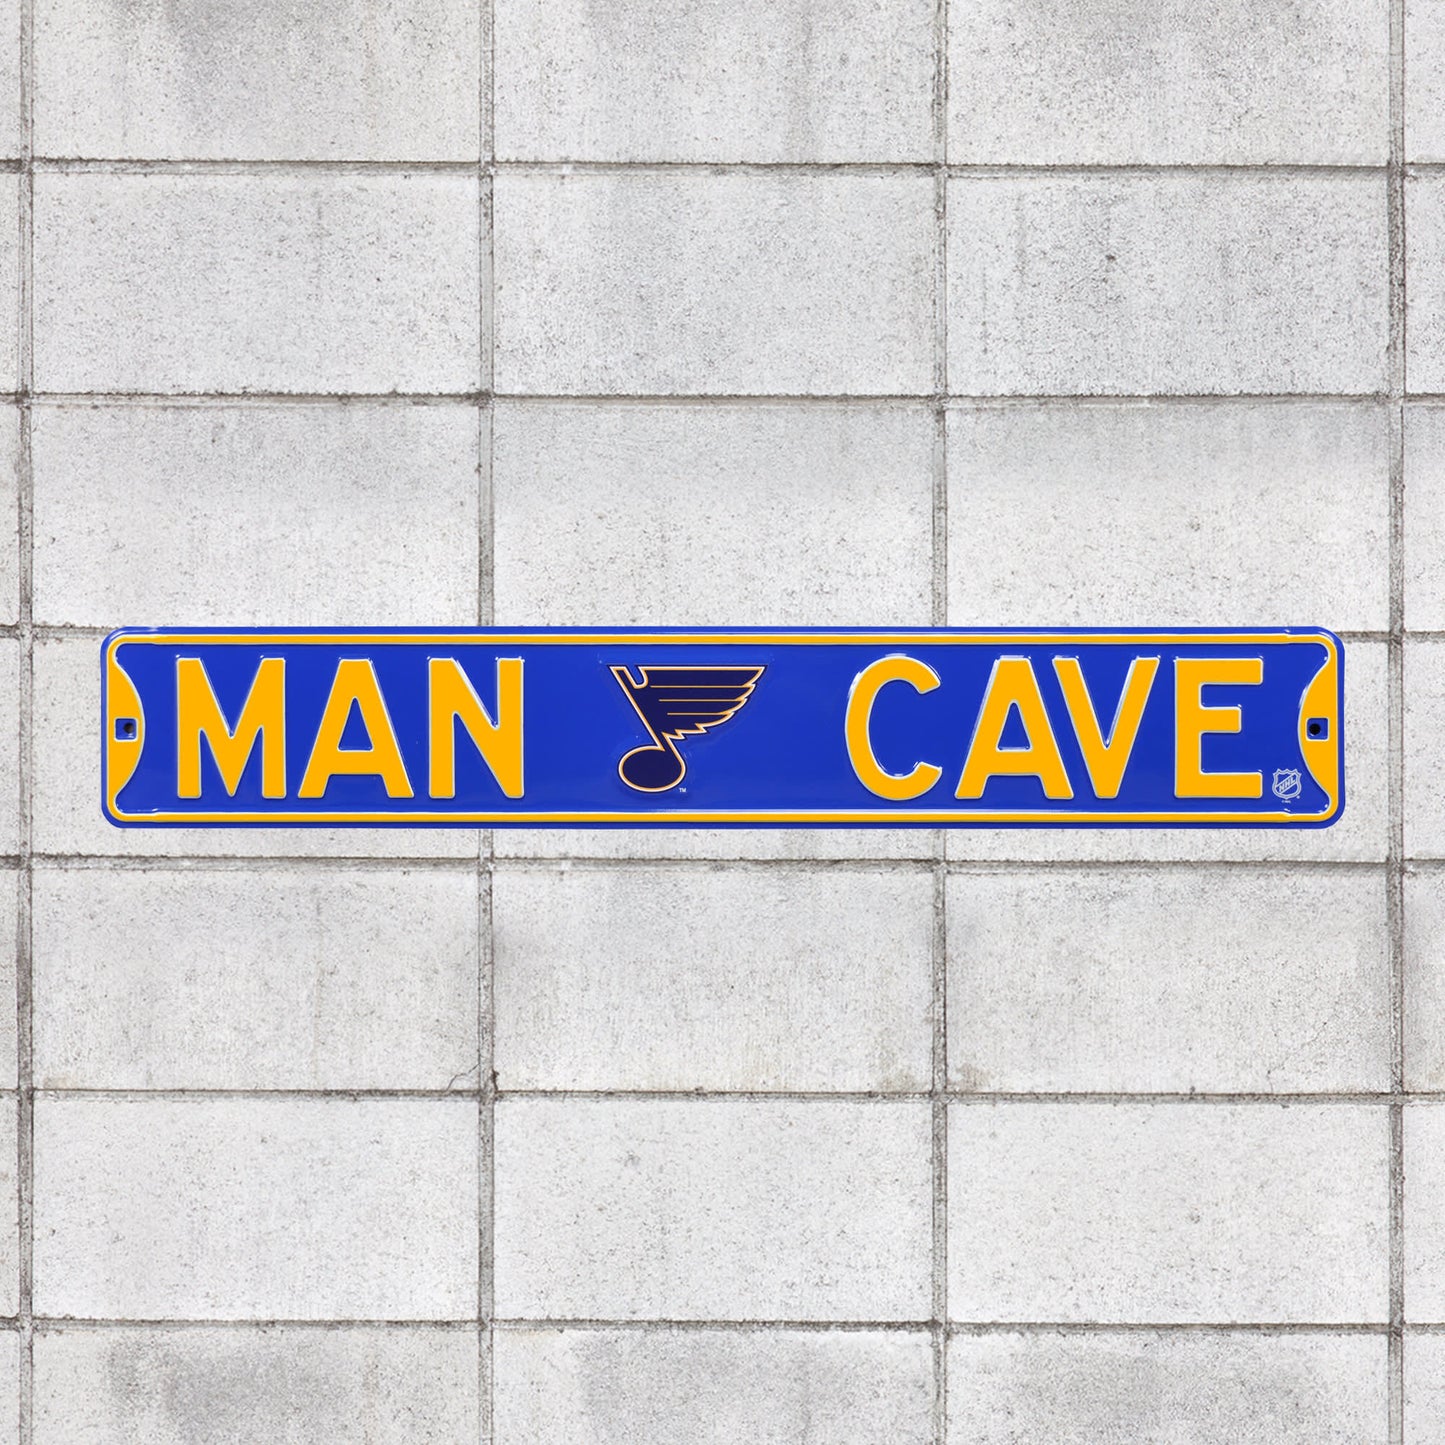 St. Louis Blues: Man Cave - Officially Licensed NHL Metal Street Sign